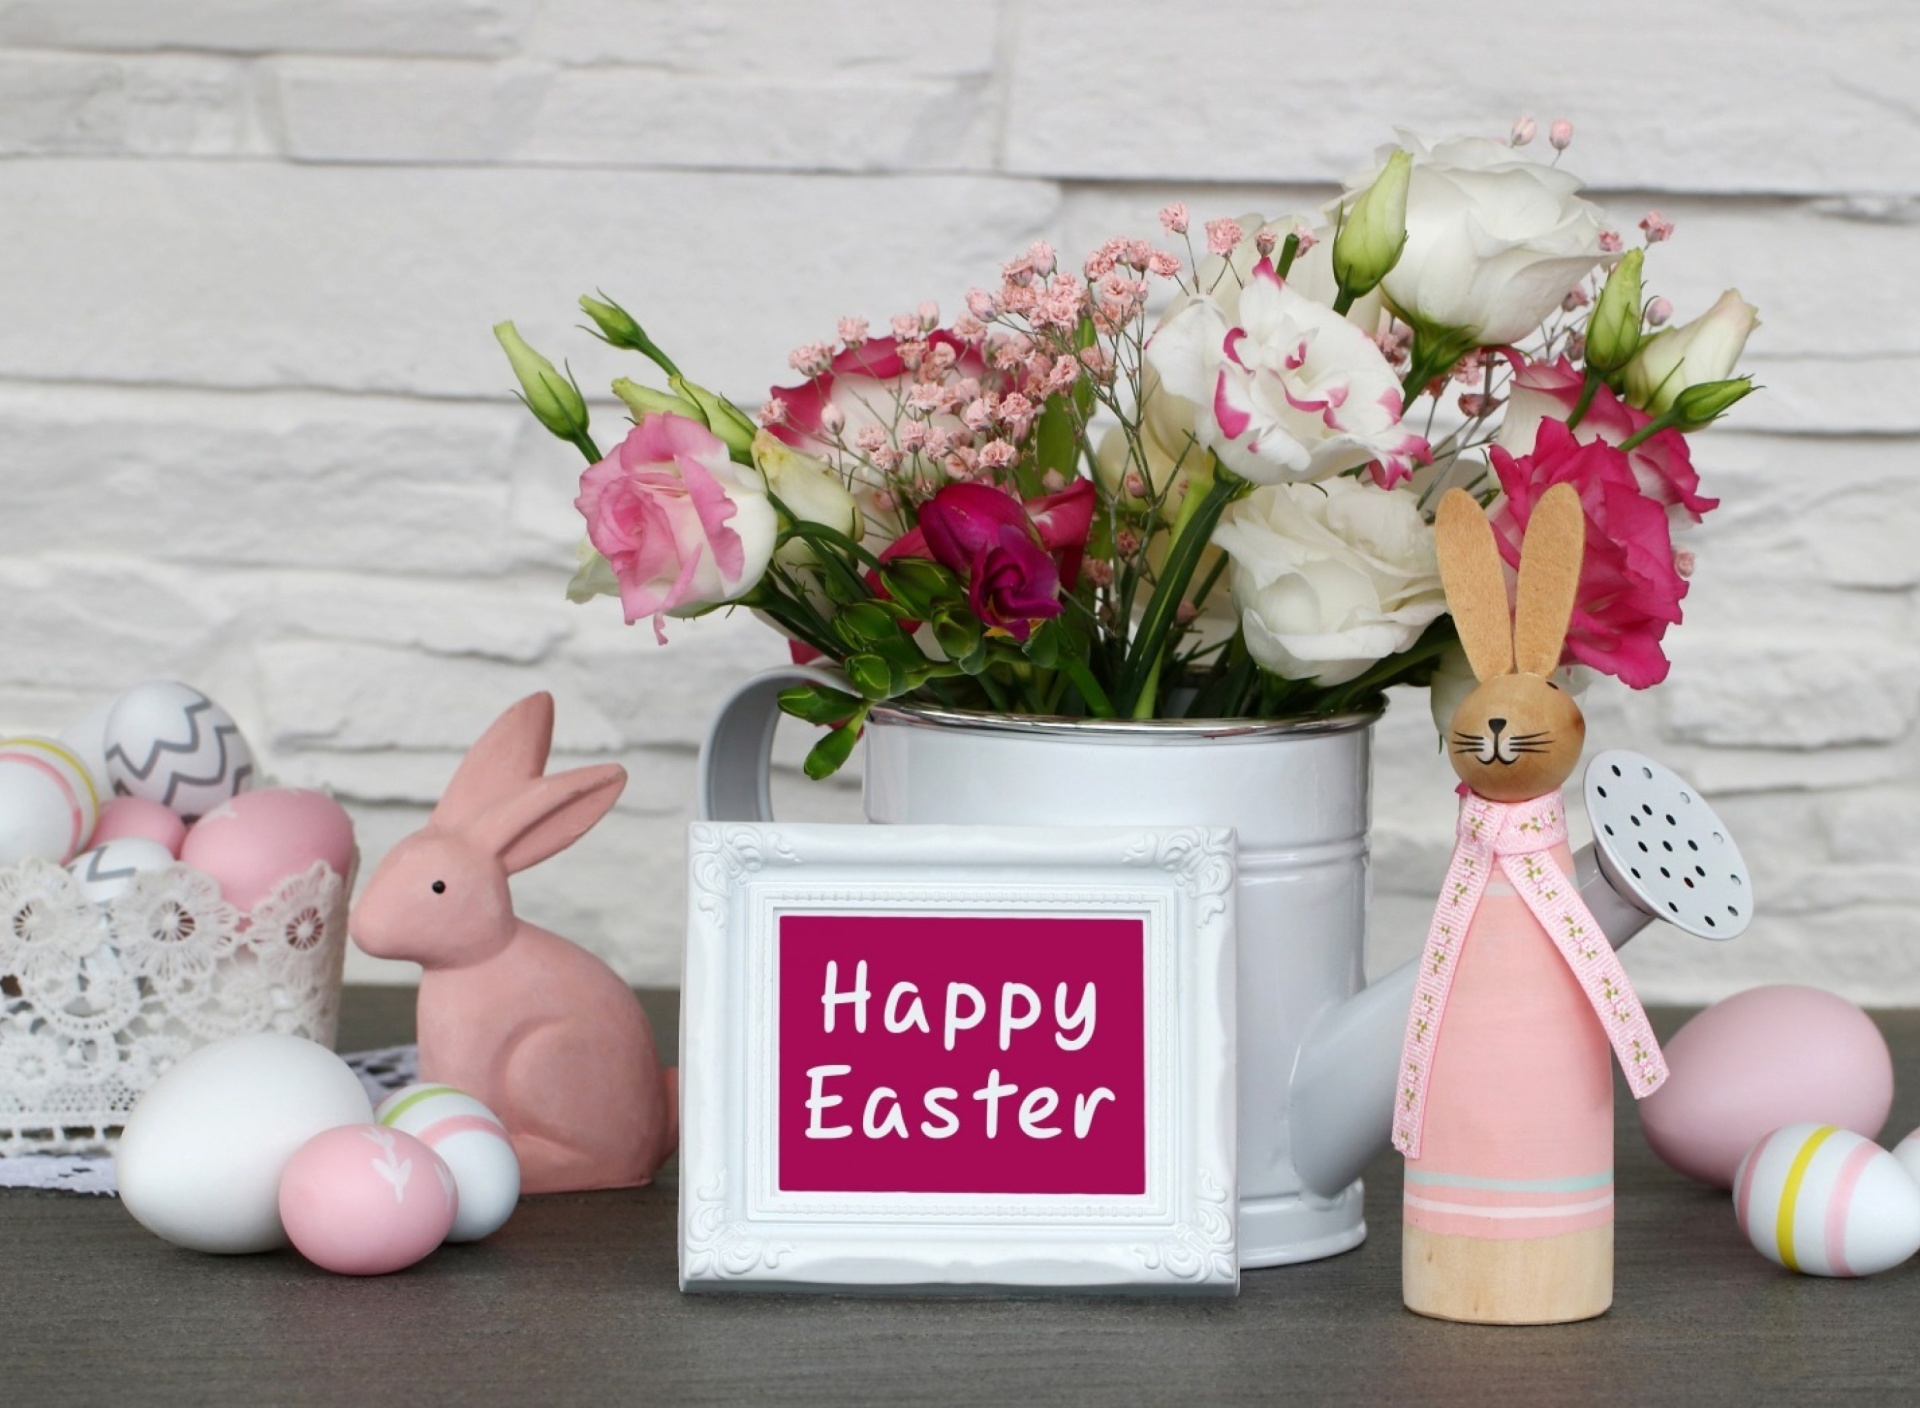 Das Happy Easter with Hare Figures Wallpaper 1920x1408